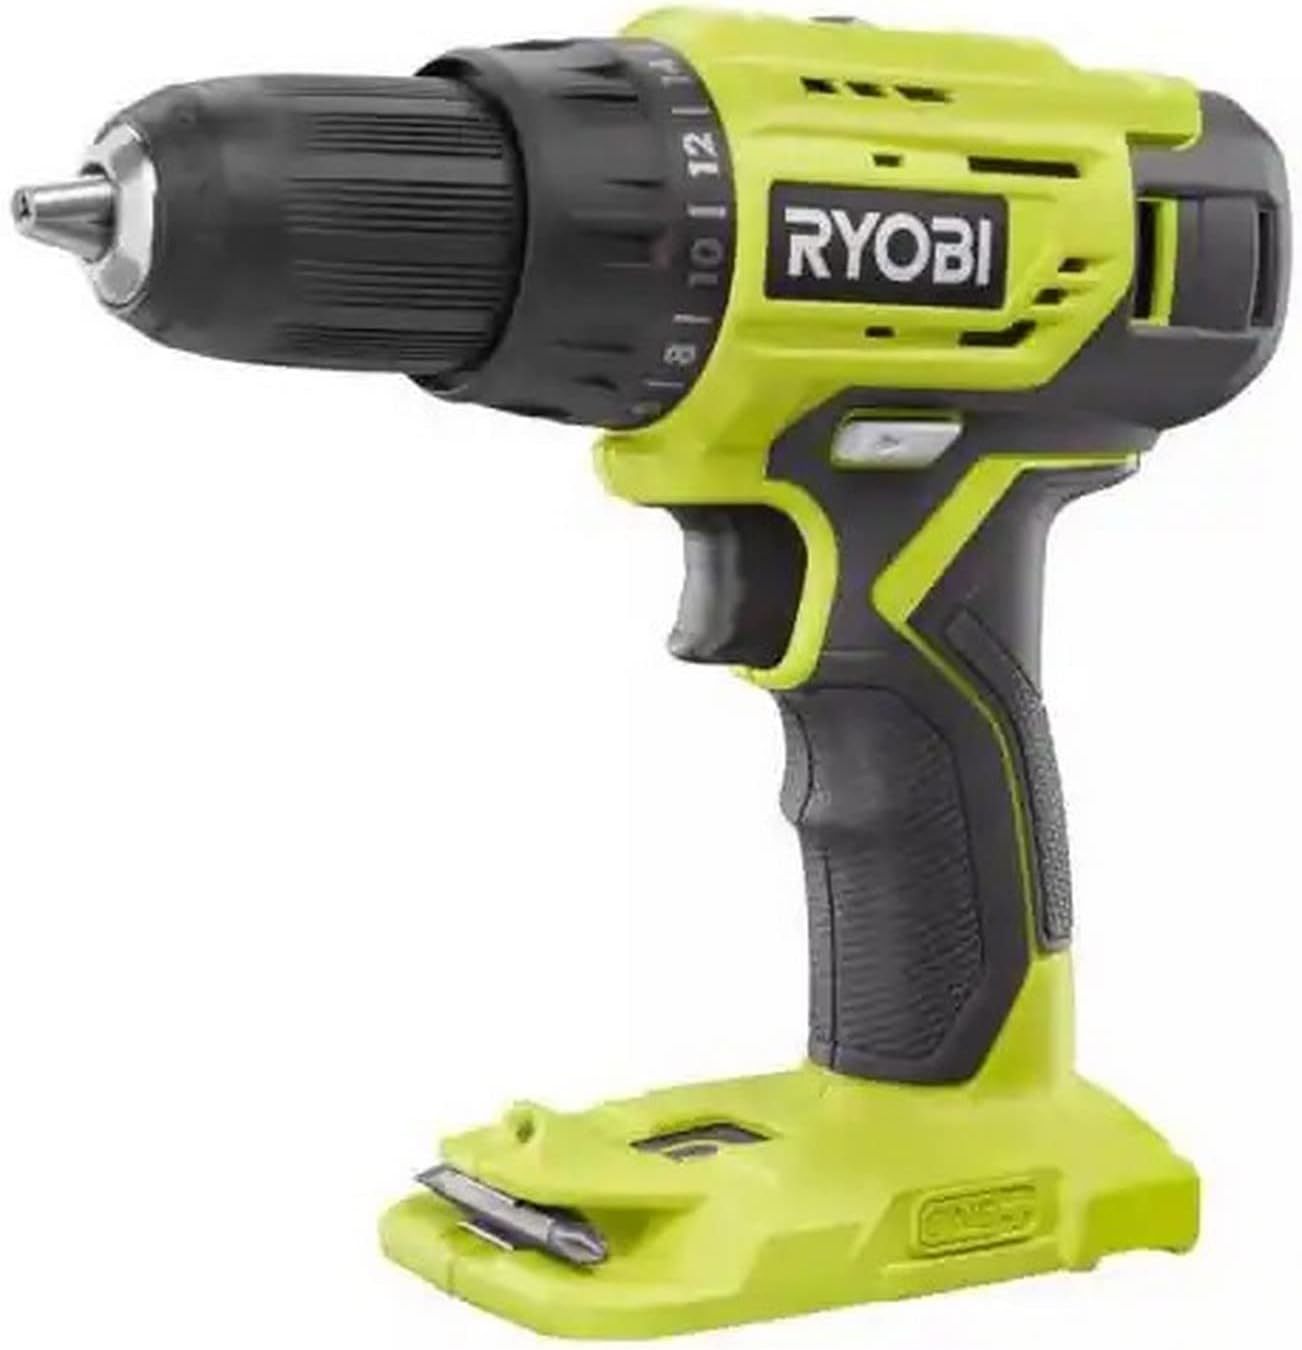 Drill/Driver (Tool Only) P215Bn, Ryobi One 18V Cordless, 1/2 In. - $0.00